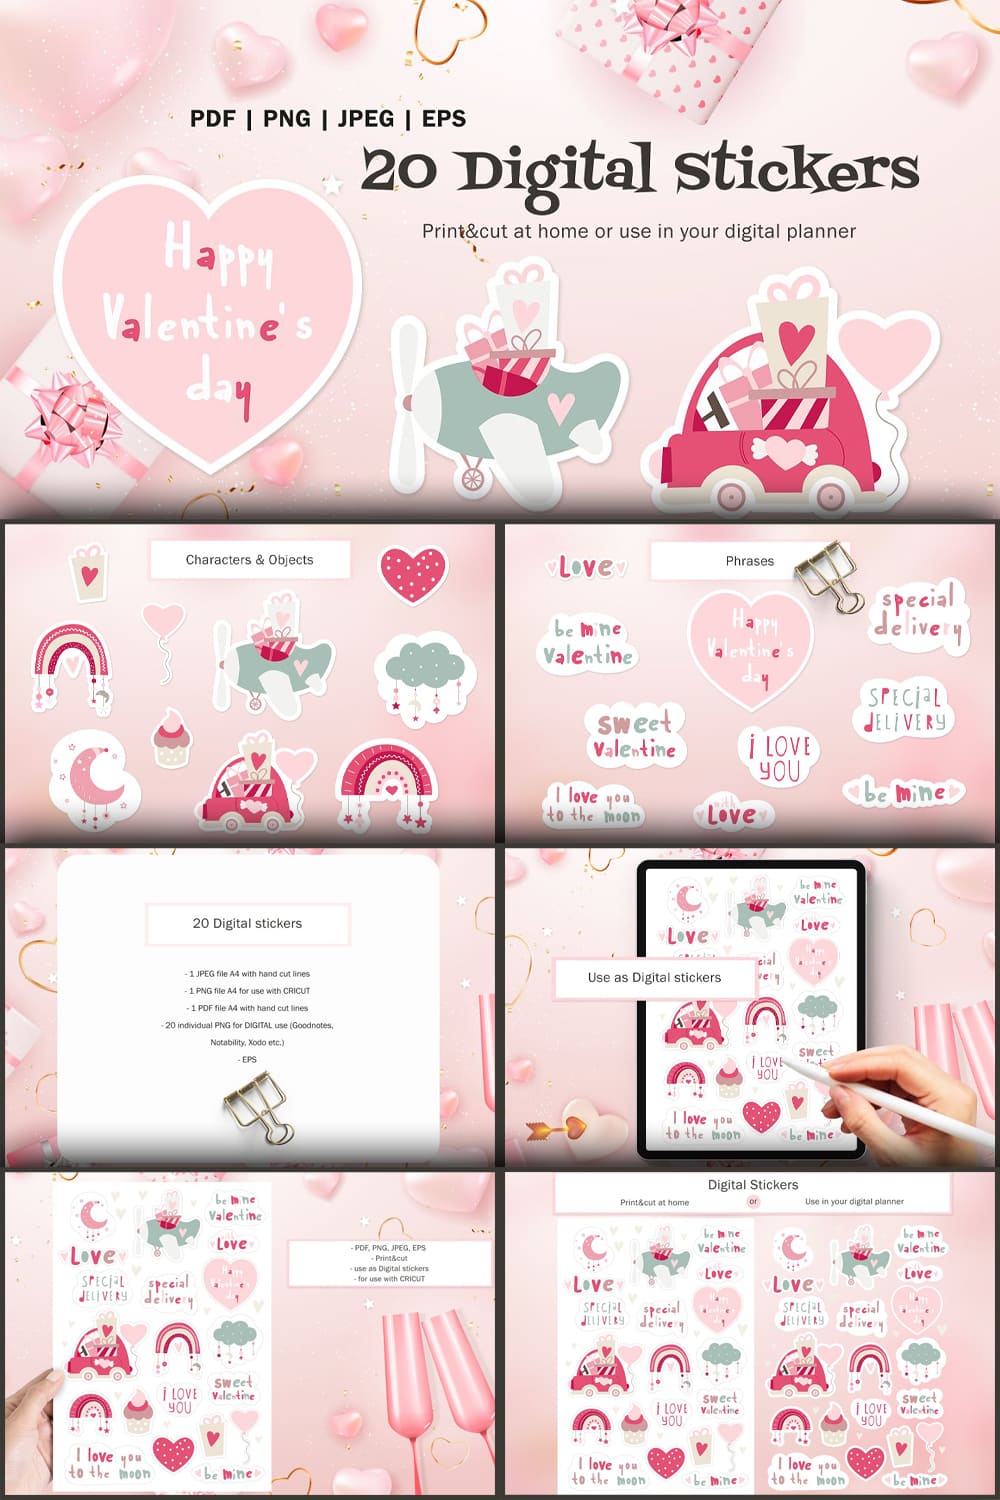 All slides of Valentine's Day Romantic Collection.